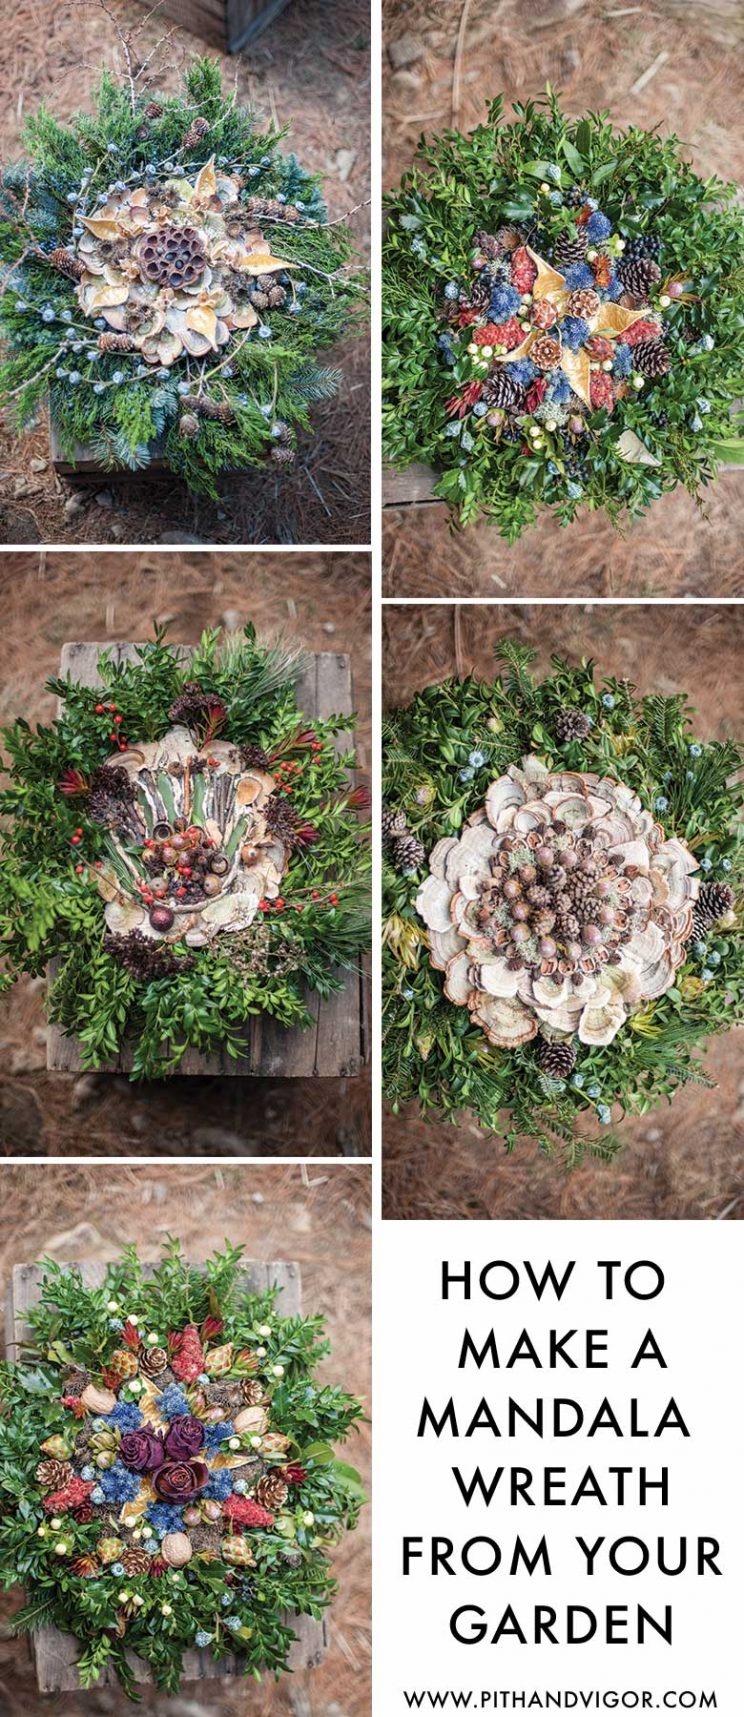 Mandala wreath inspriation - how to make a medallion wreath from your garden